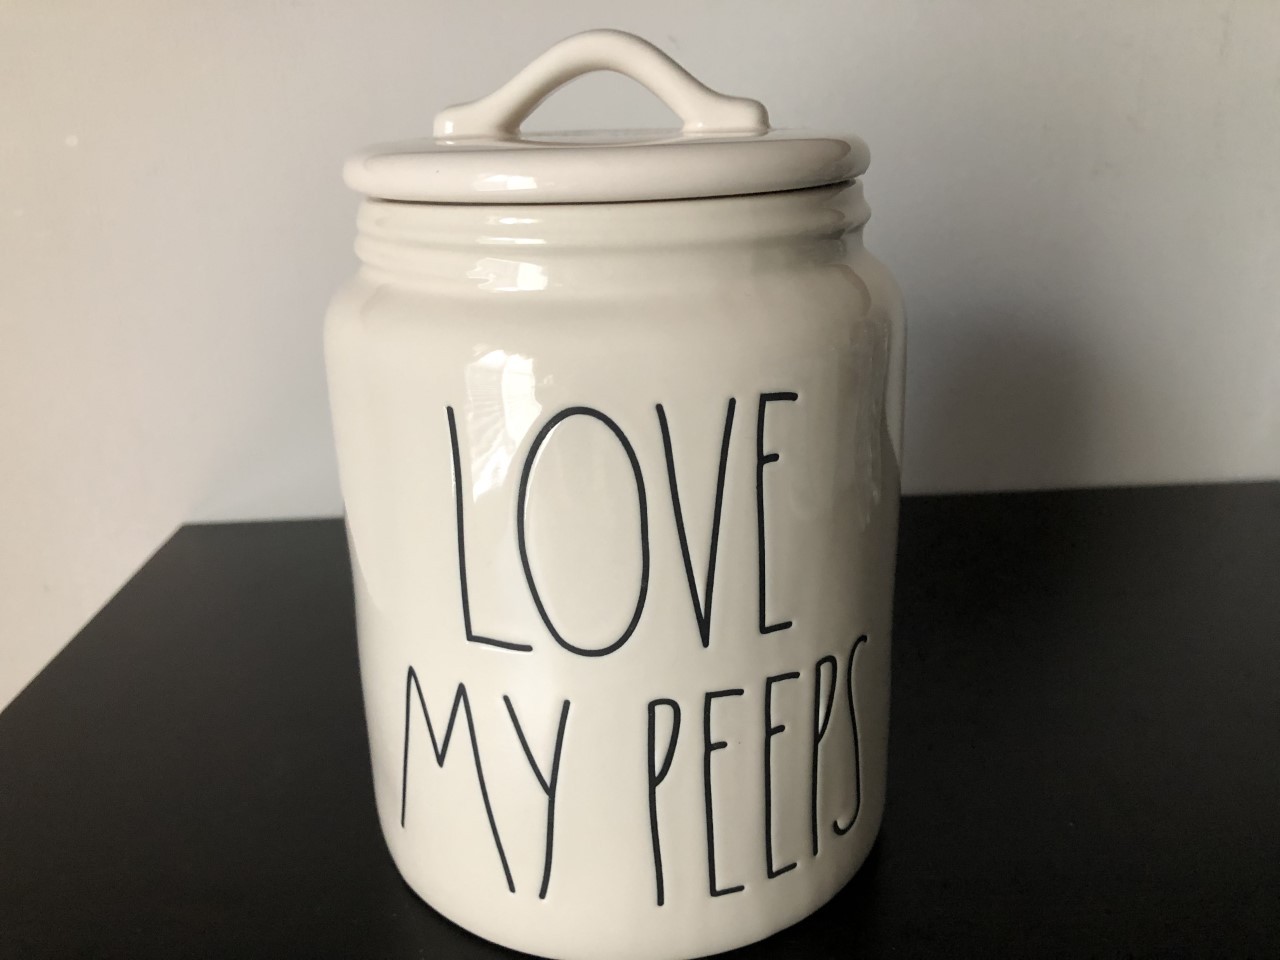 Ra Dunn Artisan Collection by Magenta "Love My Peeps" Canister - $49.95